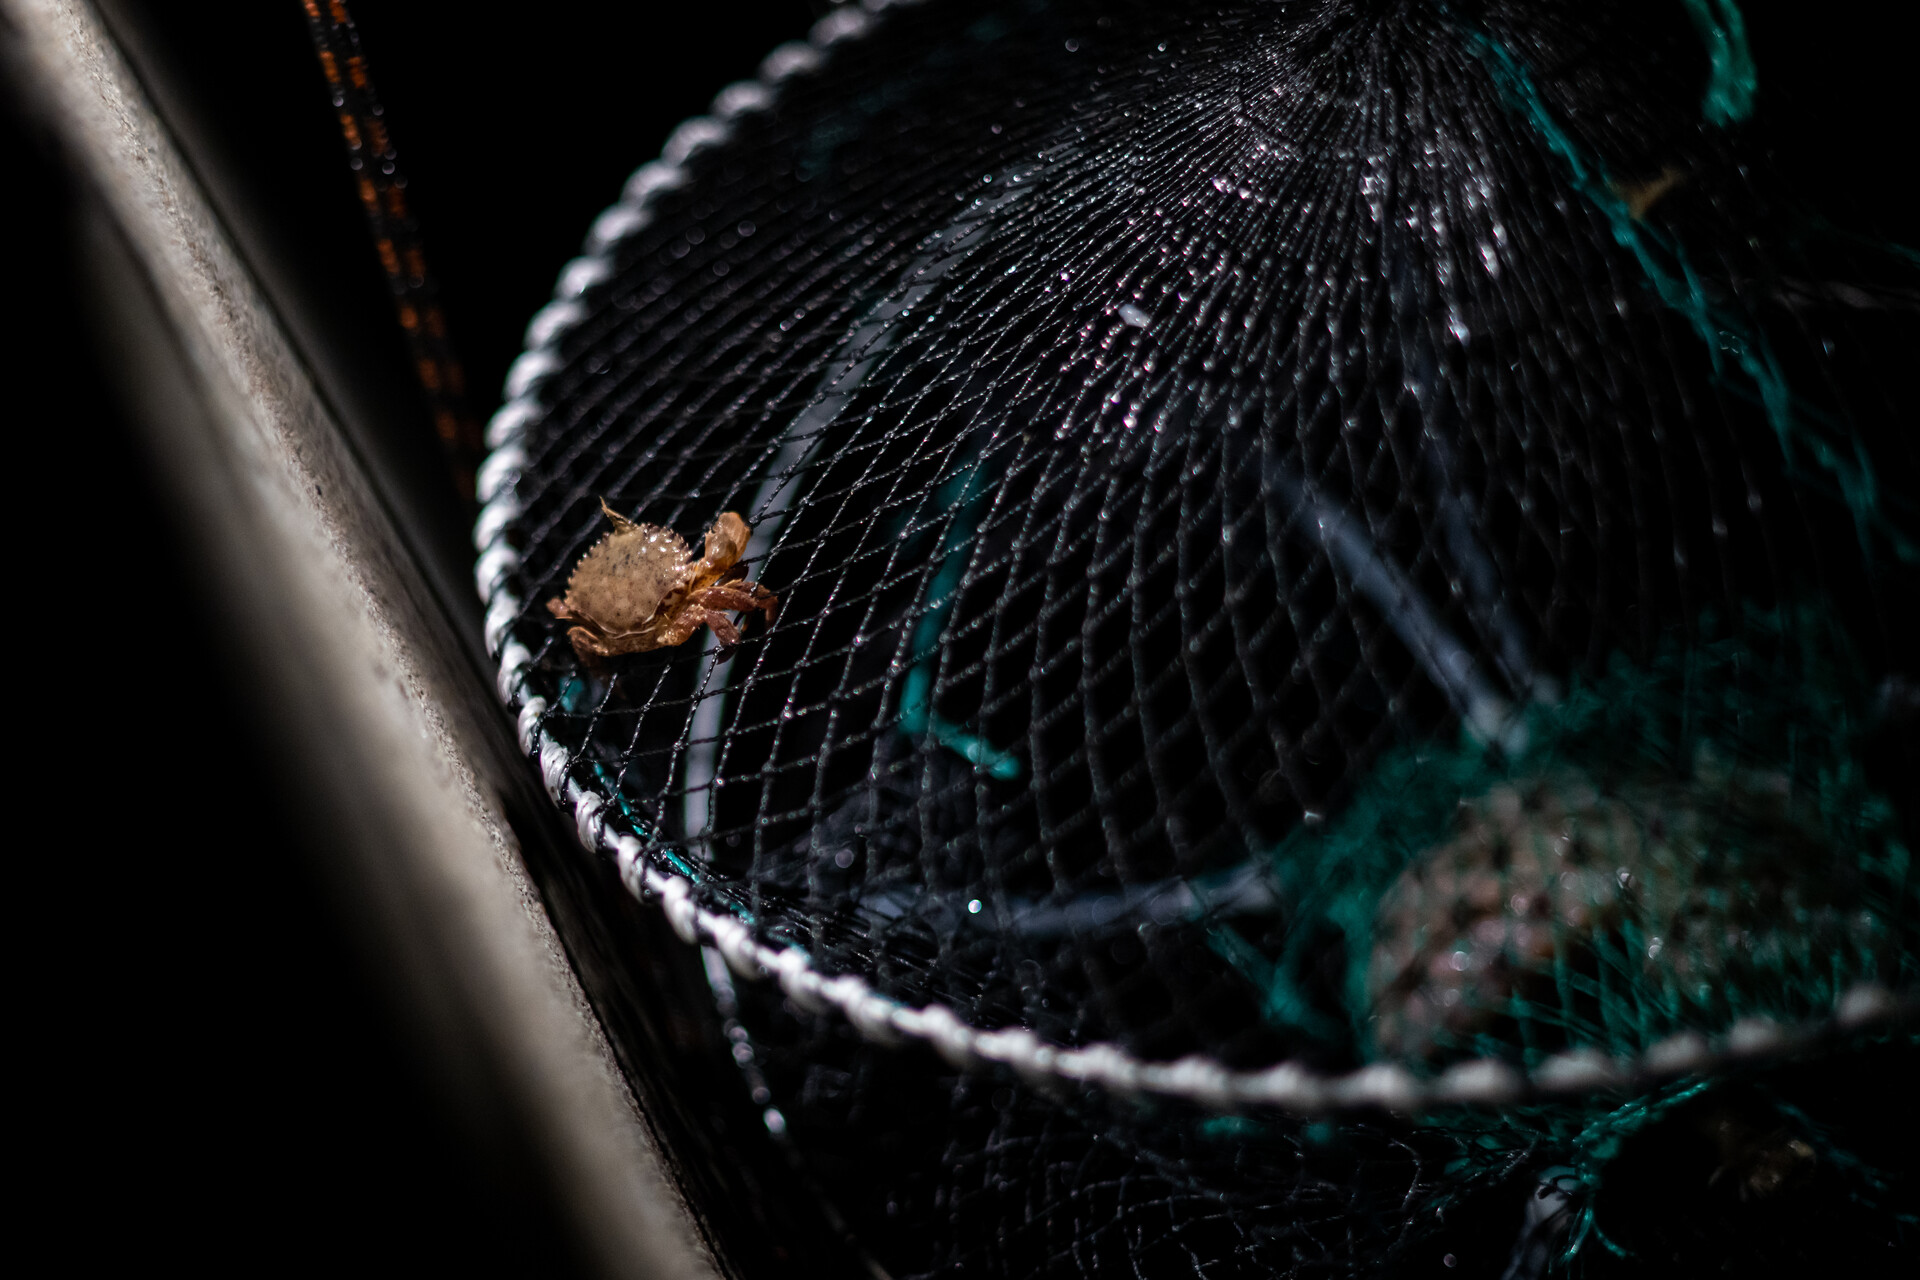 One tiny crab scuttling along the edge of a crab net.